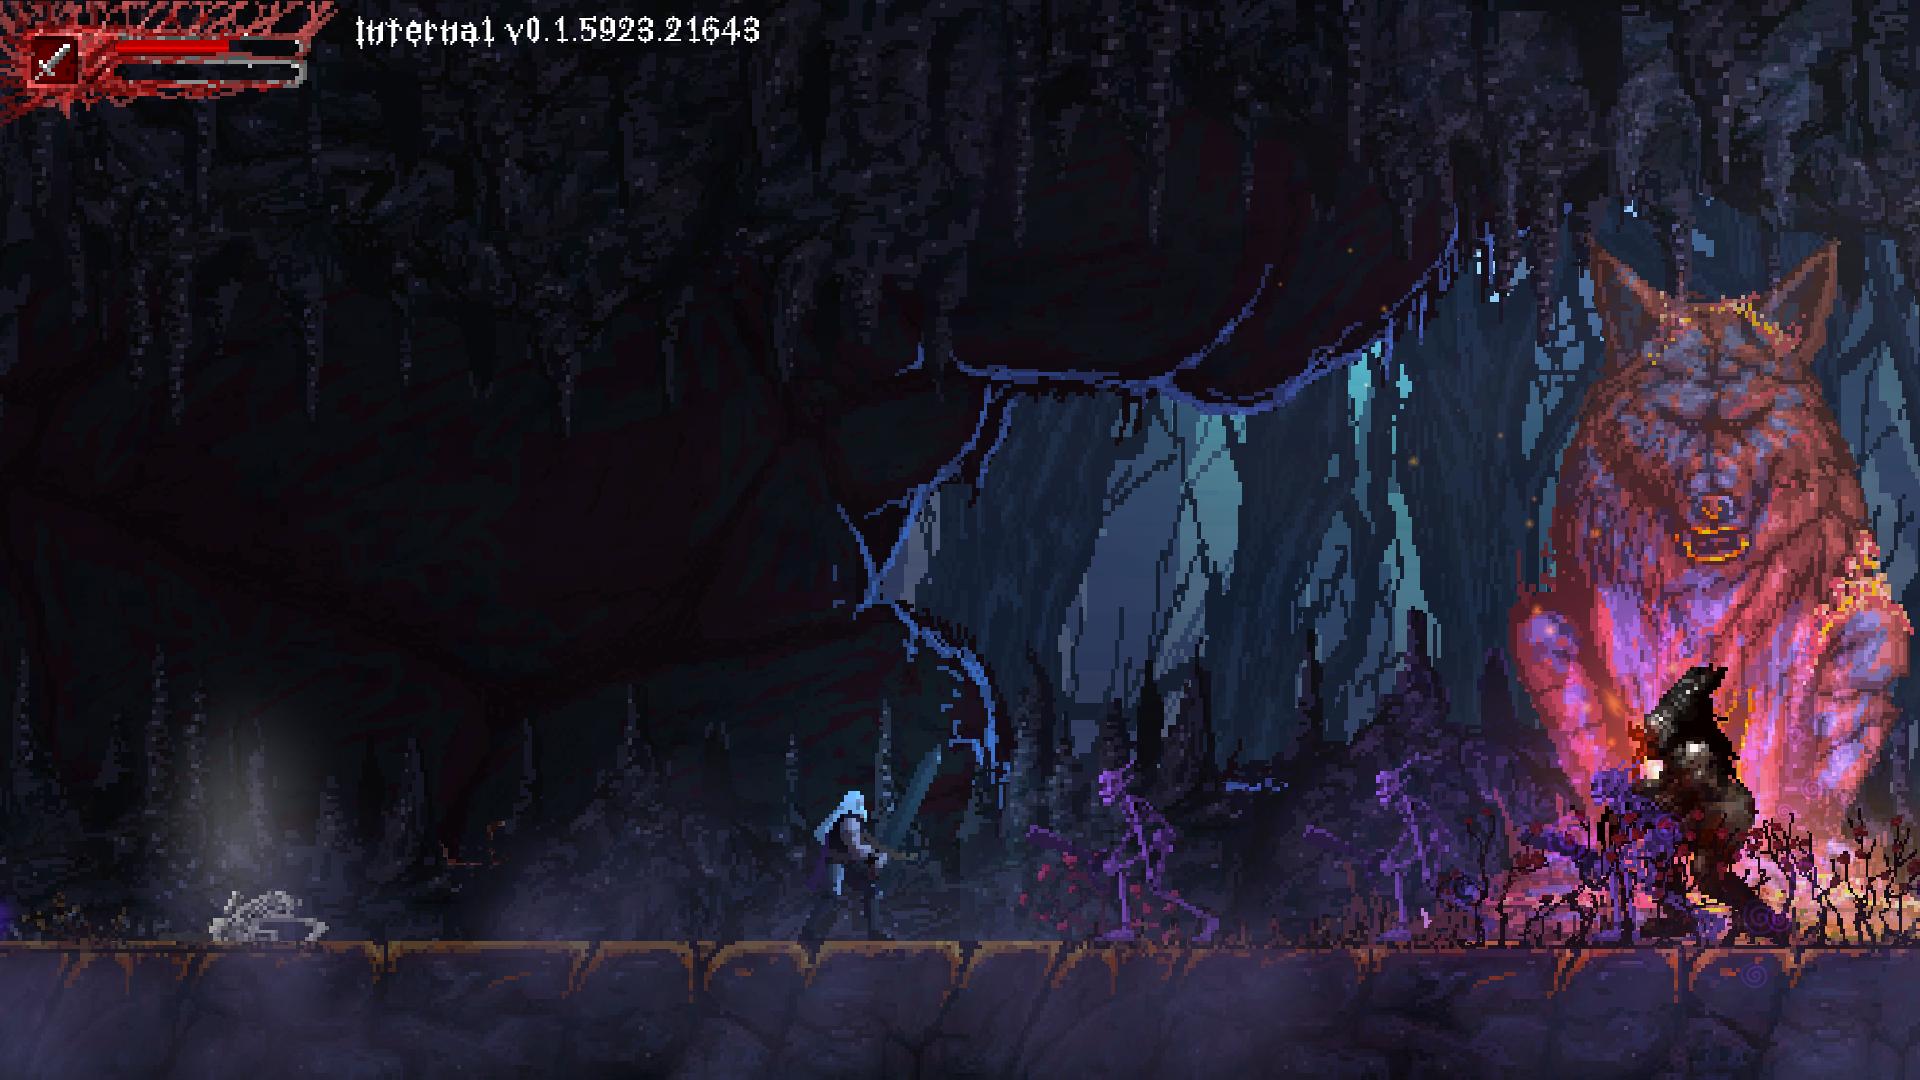 Slain: Back from Hell - Deluxe Edition DLC Featured Screenshot #1